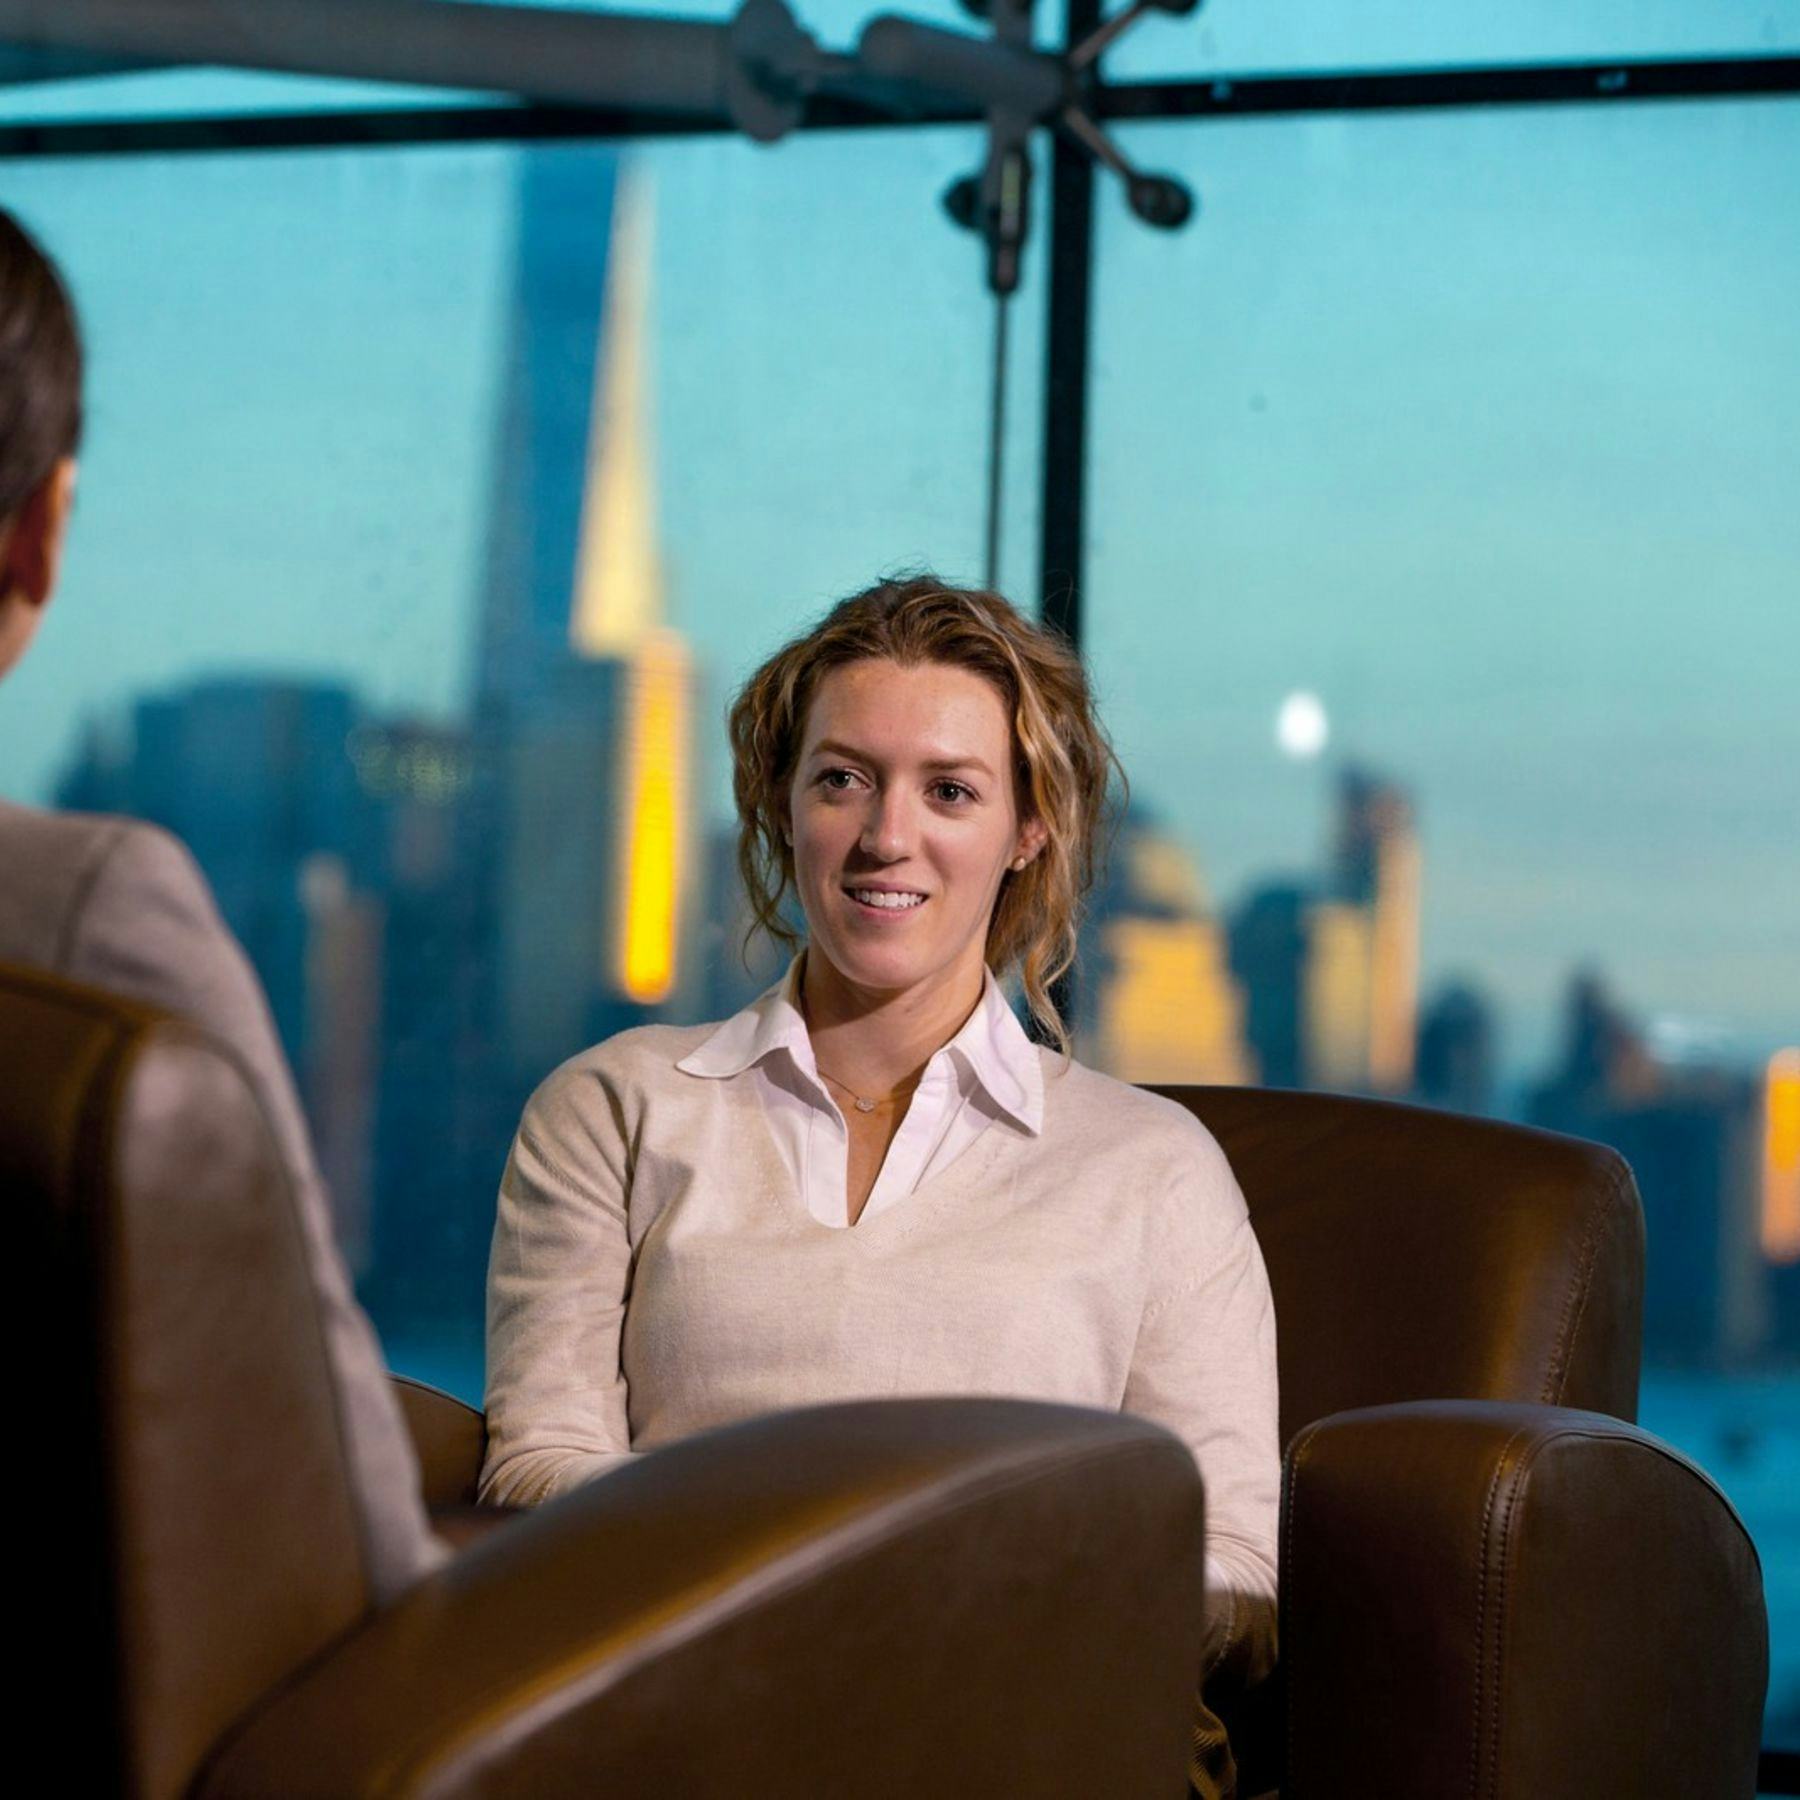 Two women talking while sitting in chairs with NYC skyline in background